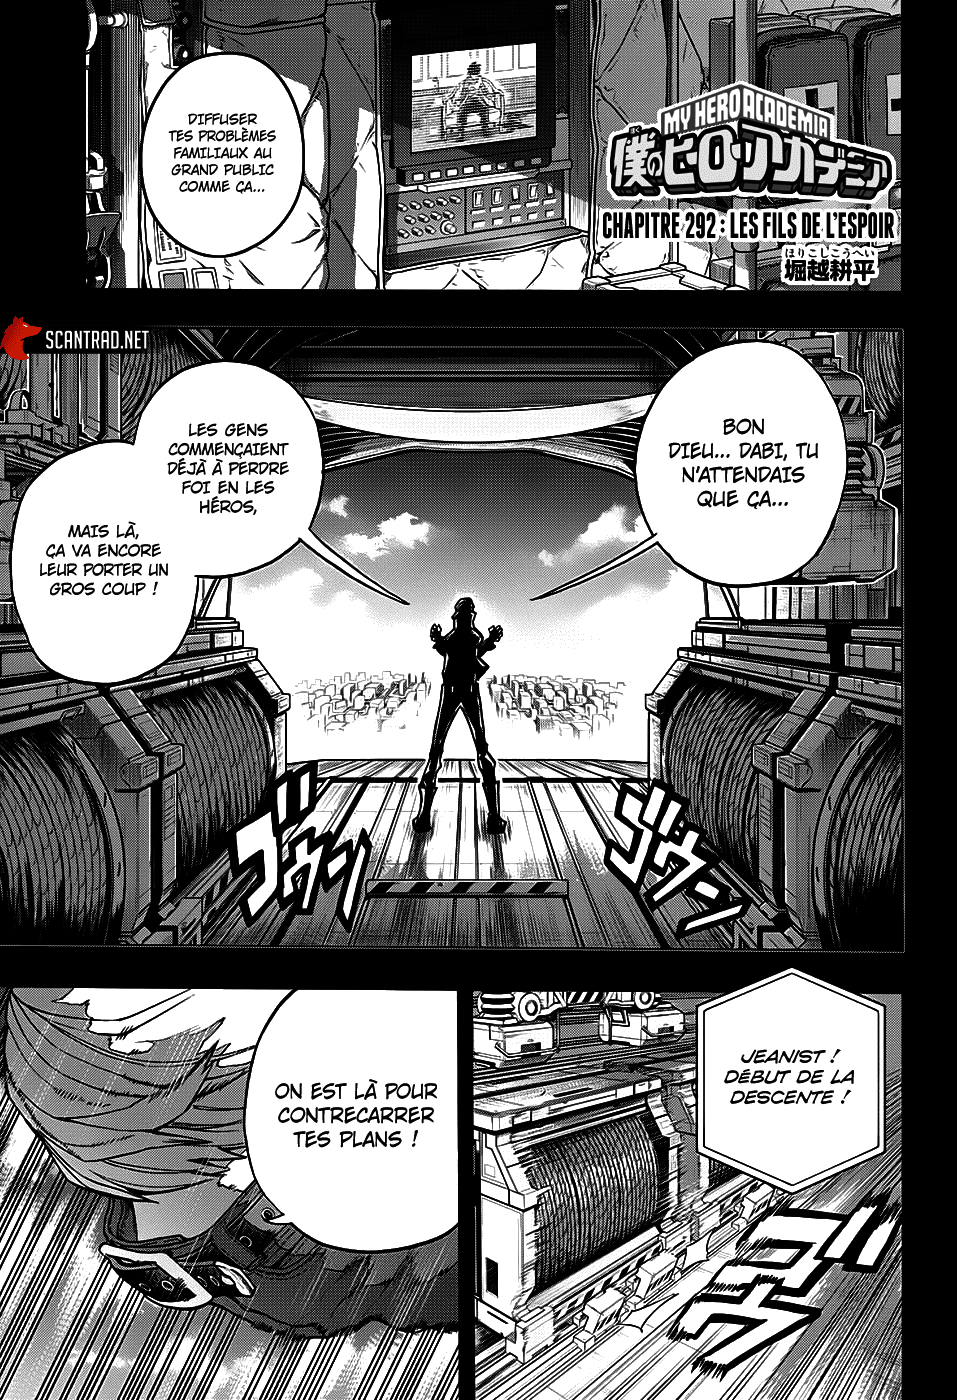 My Hero Academia: Chapter chapitre-292 - Page 1